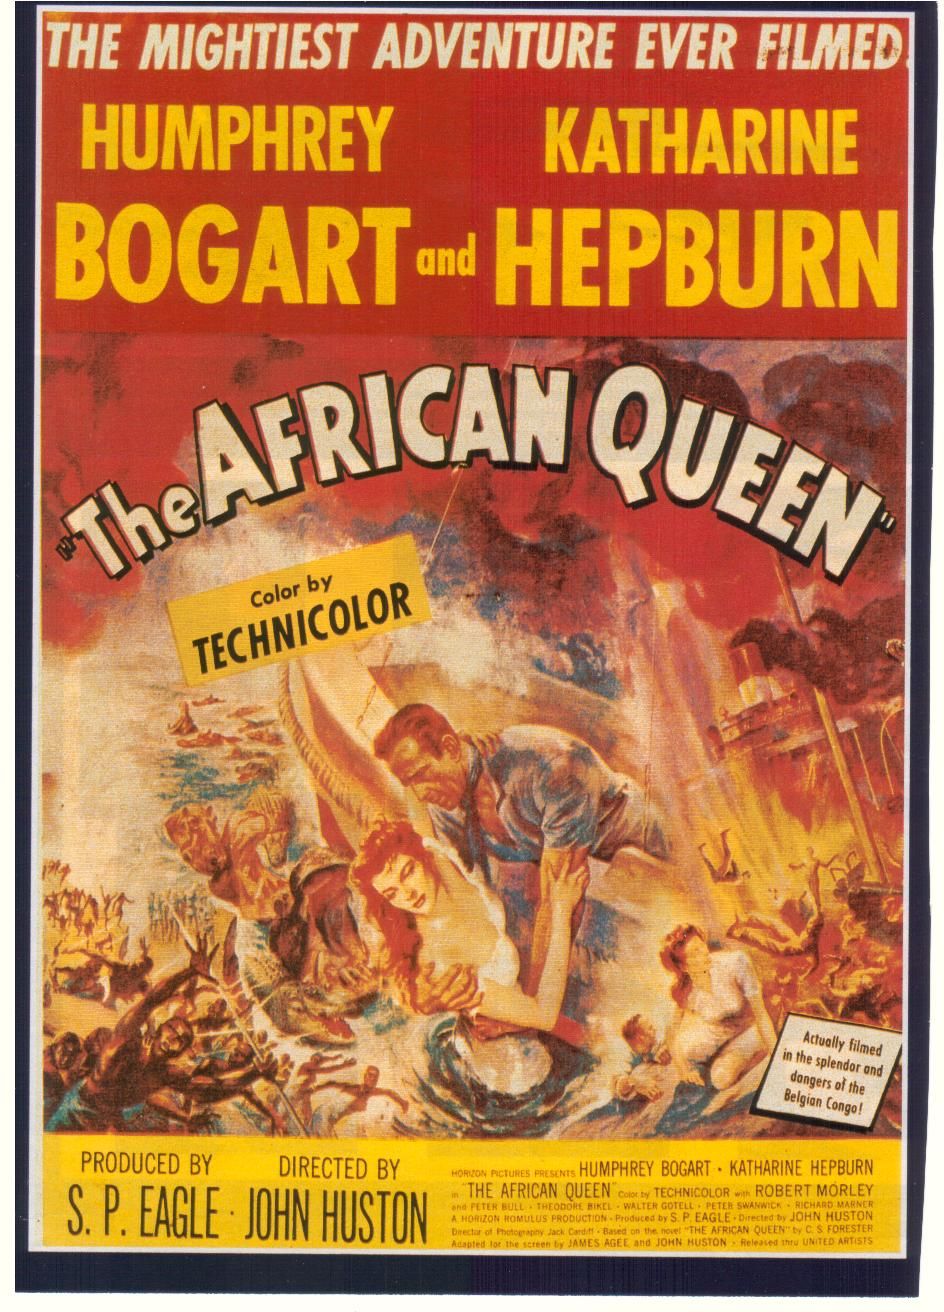 http://www.thehistoryblog.com/wp-content/uploads/2011/12/african_queen_xlg.jpg